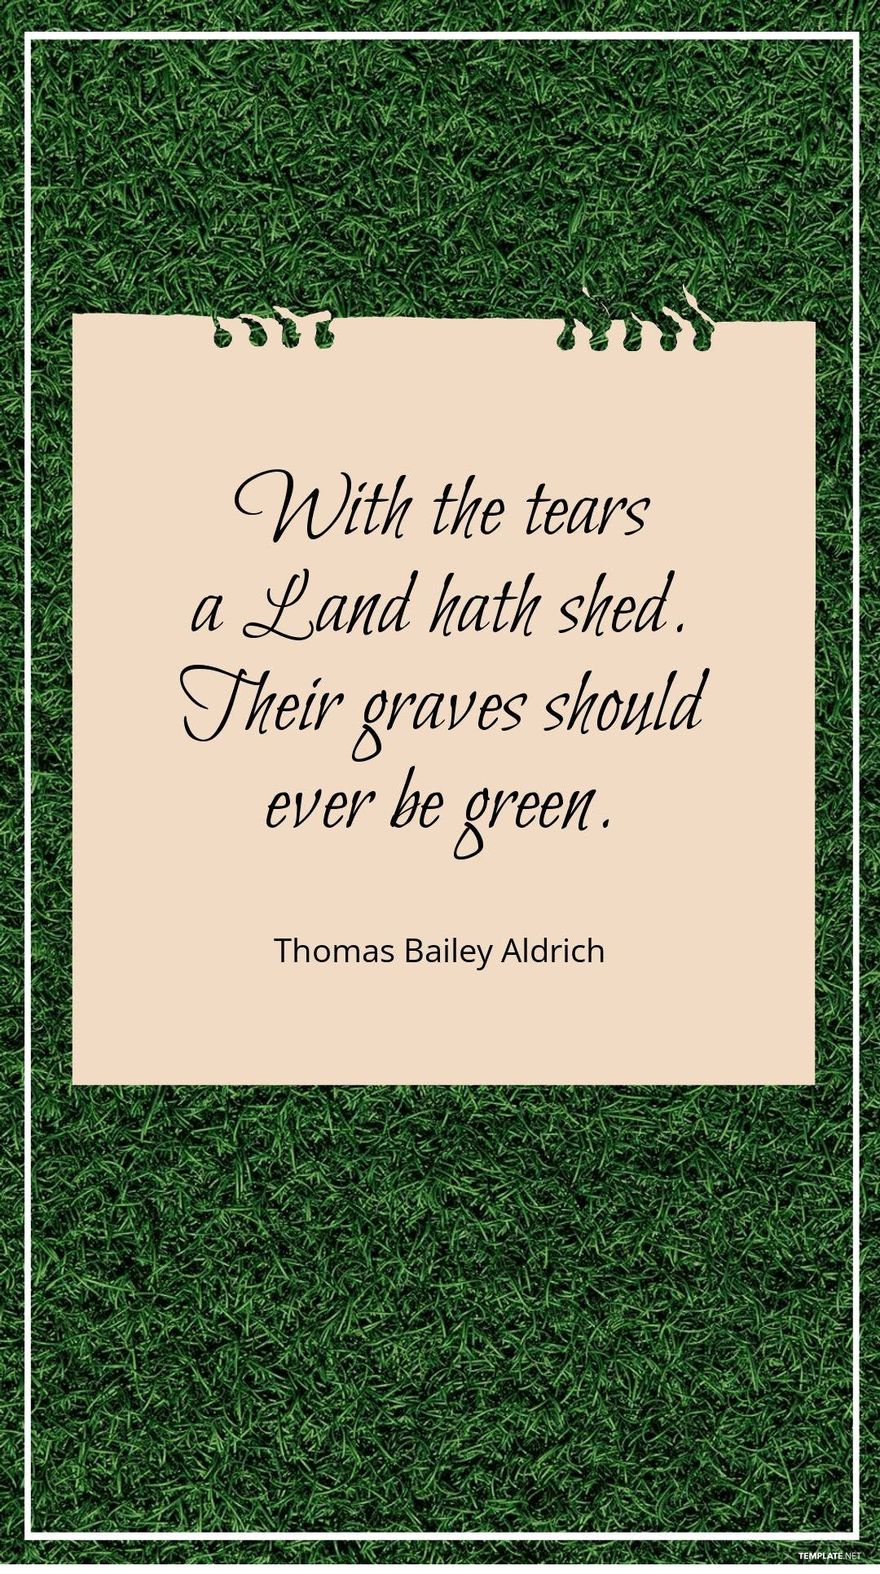 Thomas Bailey Aldrich - With the tears a Land hath shed. Their graves should ever be green. Template